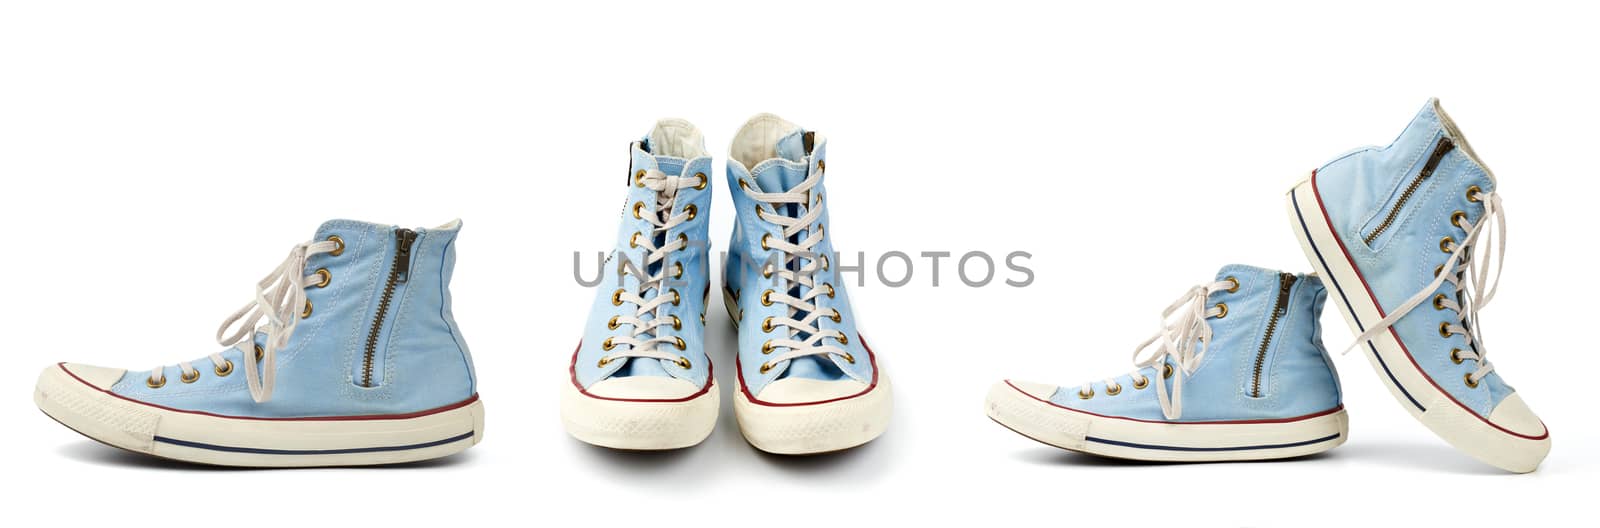 pair of light blue worn textile sneakers with laces and zippers  by ndanko